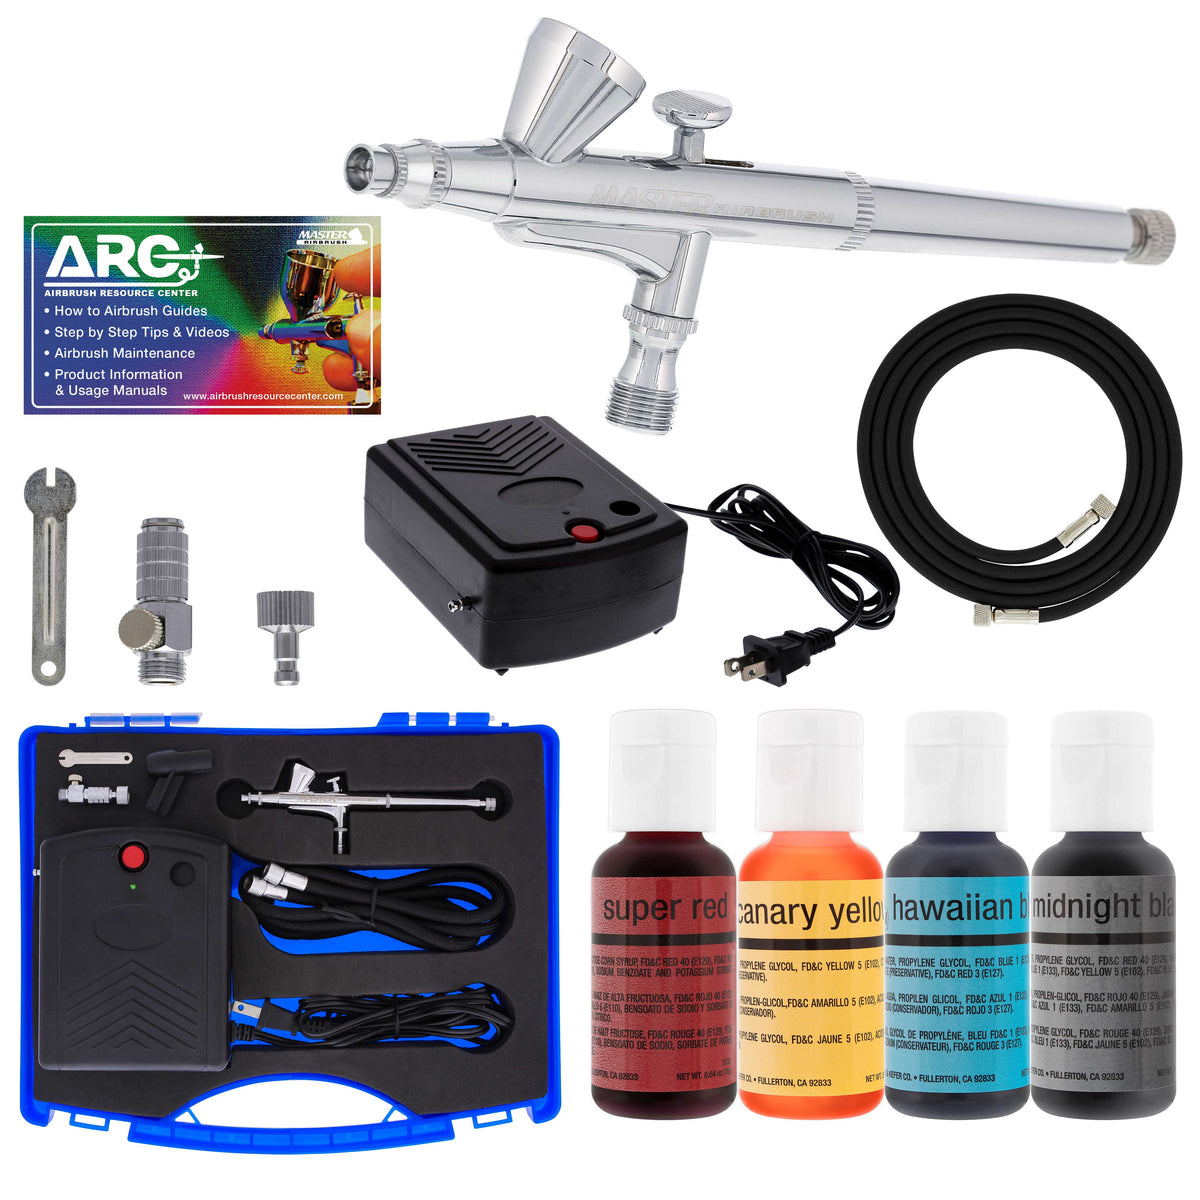 Cake Decorating Airbrush System with 12 Food Colors, Air Compressor — TCP  Global